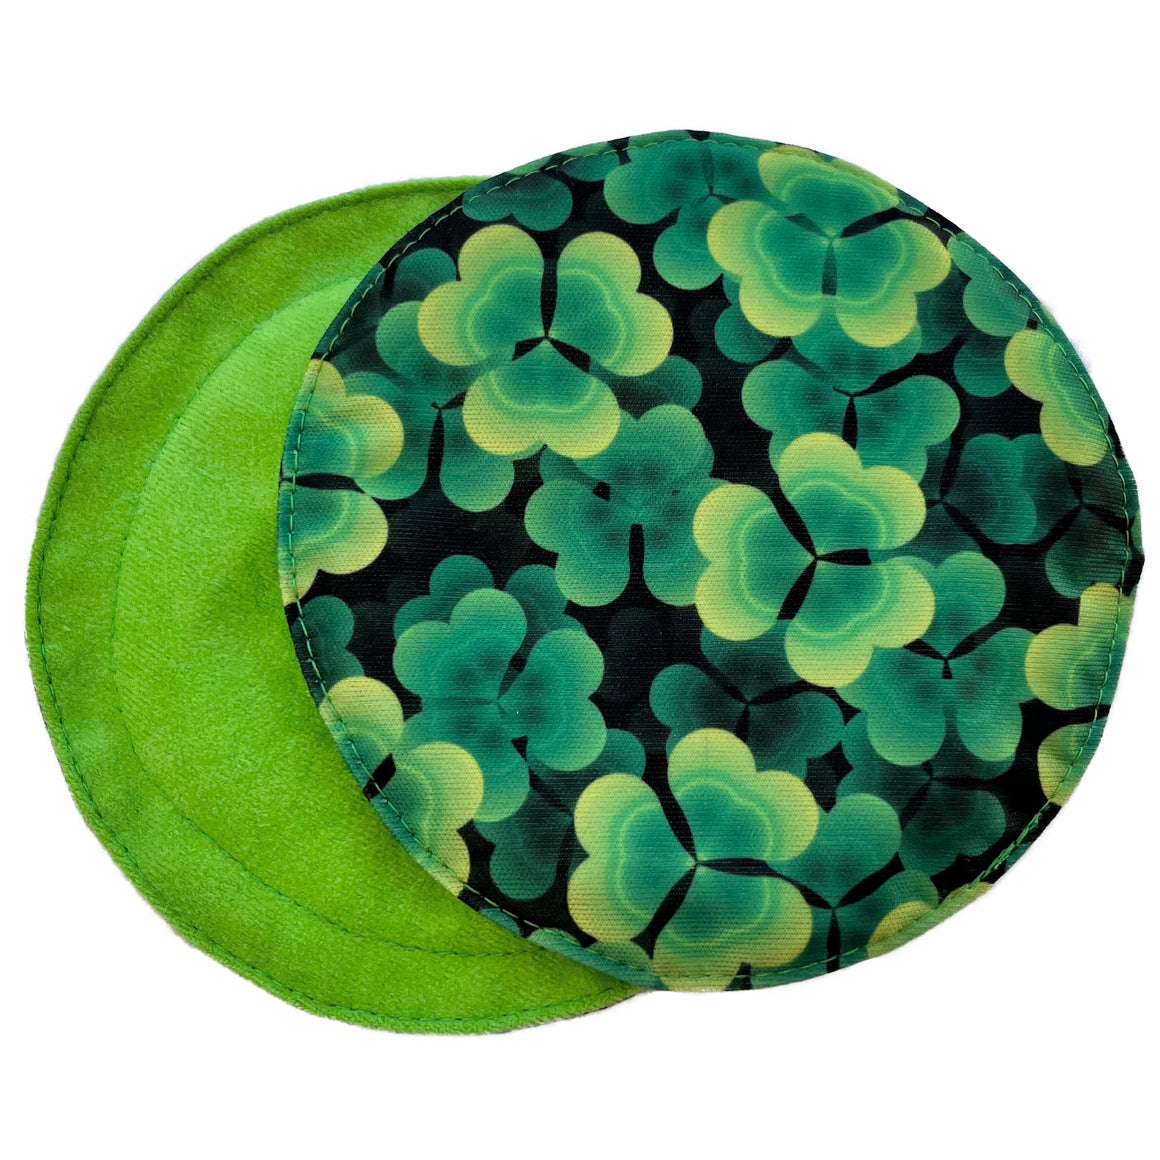 Scarlet Eve Shamrocks Breast Pads. Top: Solid bright lime green suedecloth. Back: PUL with lime and emerald green shamrocks on a dark green and black background. 2 layers bamboo fleece sewn in. Scarlet Eve breast pads have generous coverage and superior absorbency.